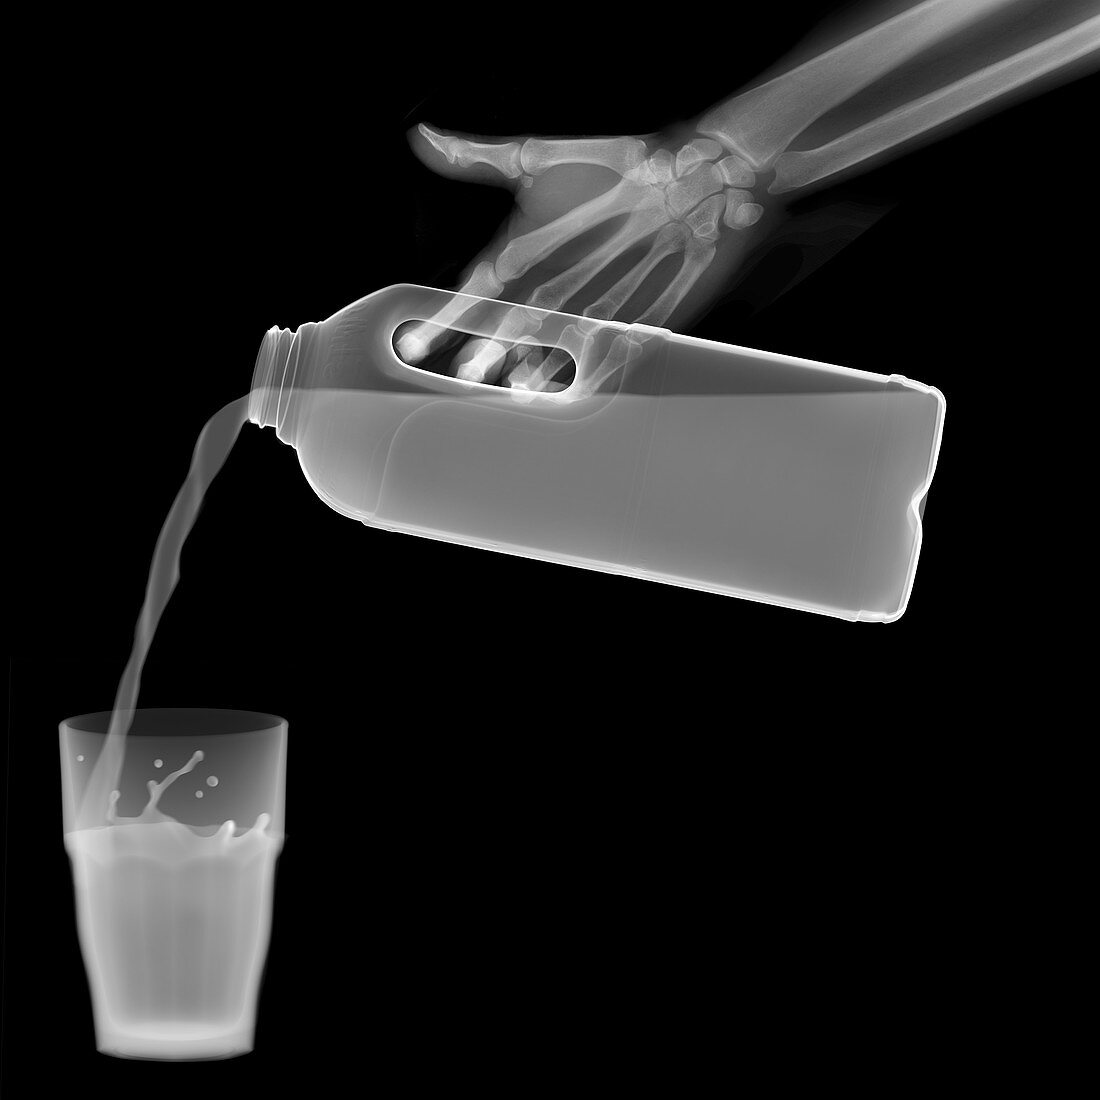 Milk pouring into a tumbler, X-ray